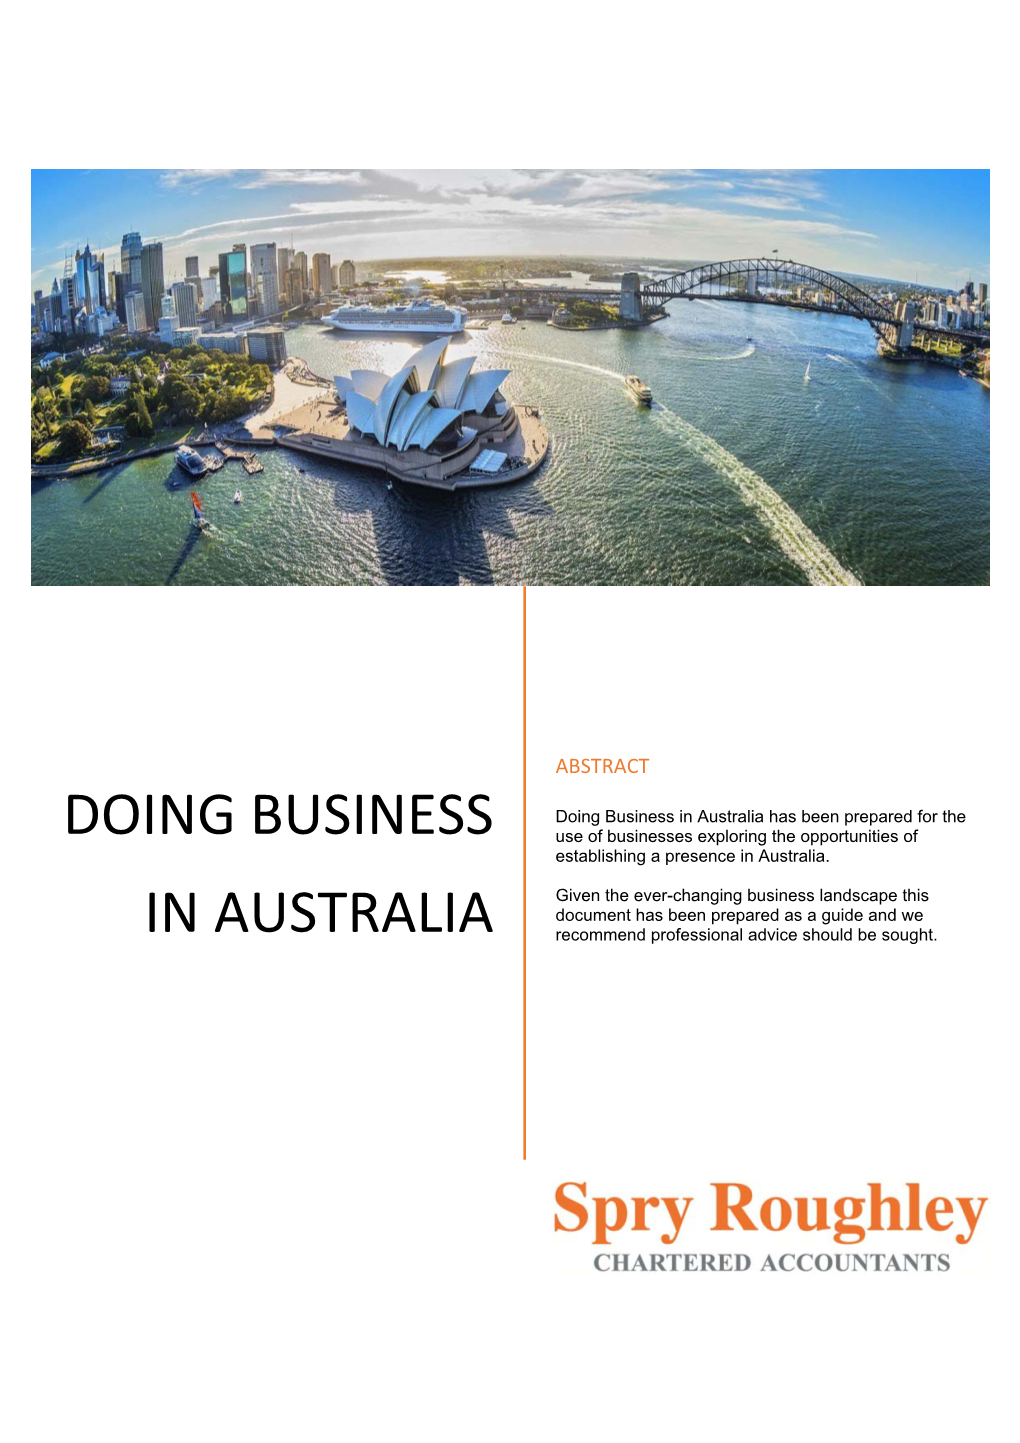 Doing Business in Australia Has Been Prepared for the DOING BUSINESS Use of Businesses Exploring the Opportunities of Establishing a Presence in Australia